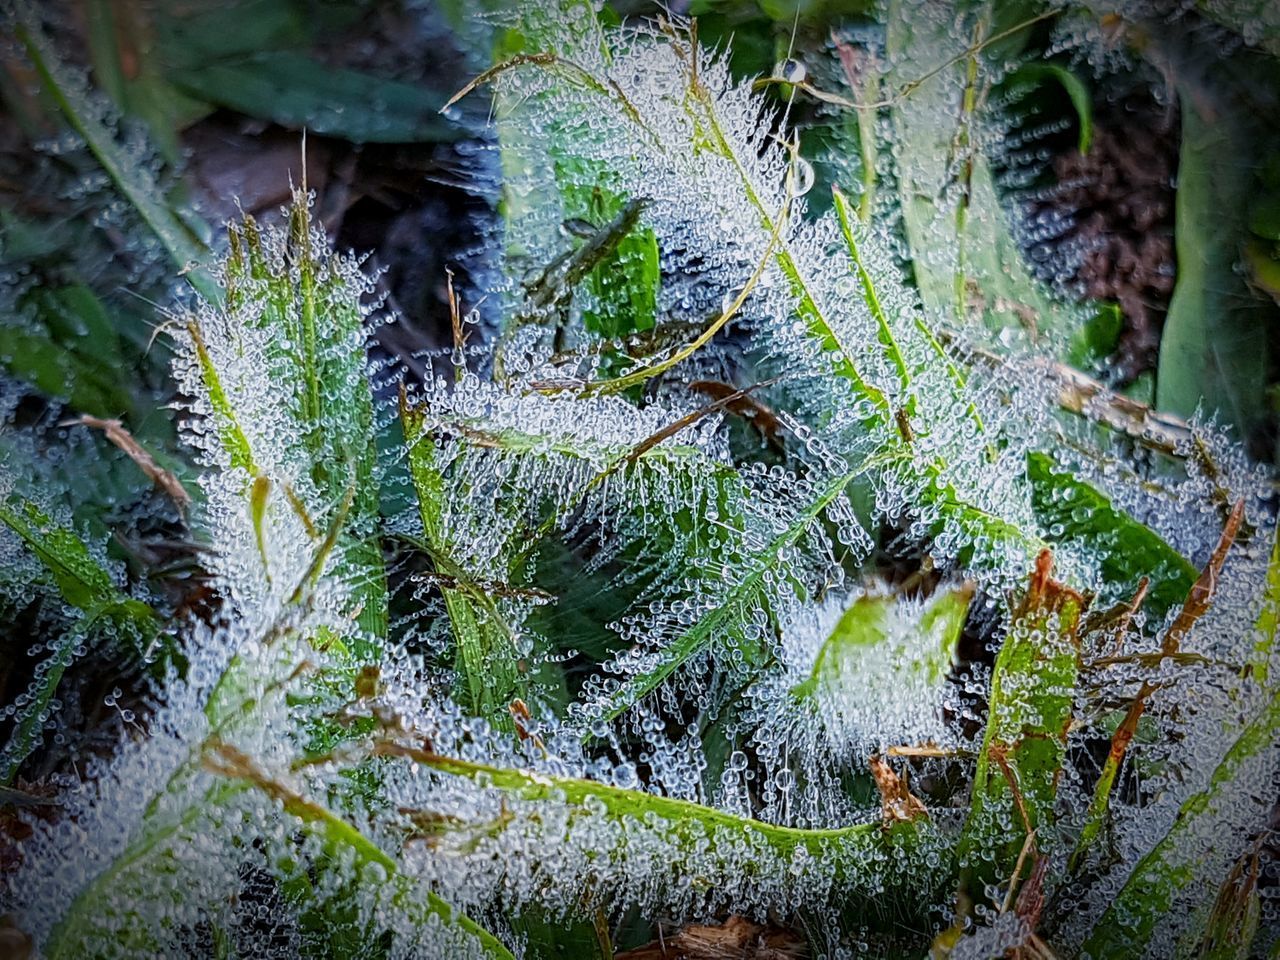 CLOSE-UP OF MOSS ON PLANT